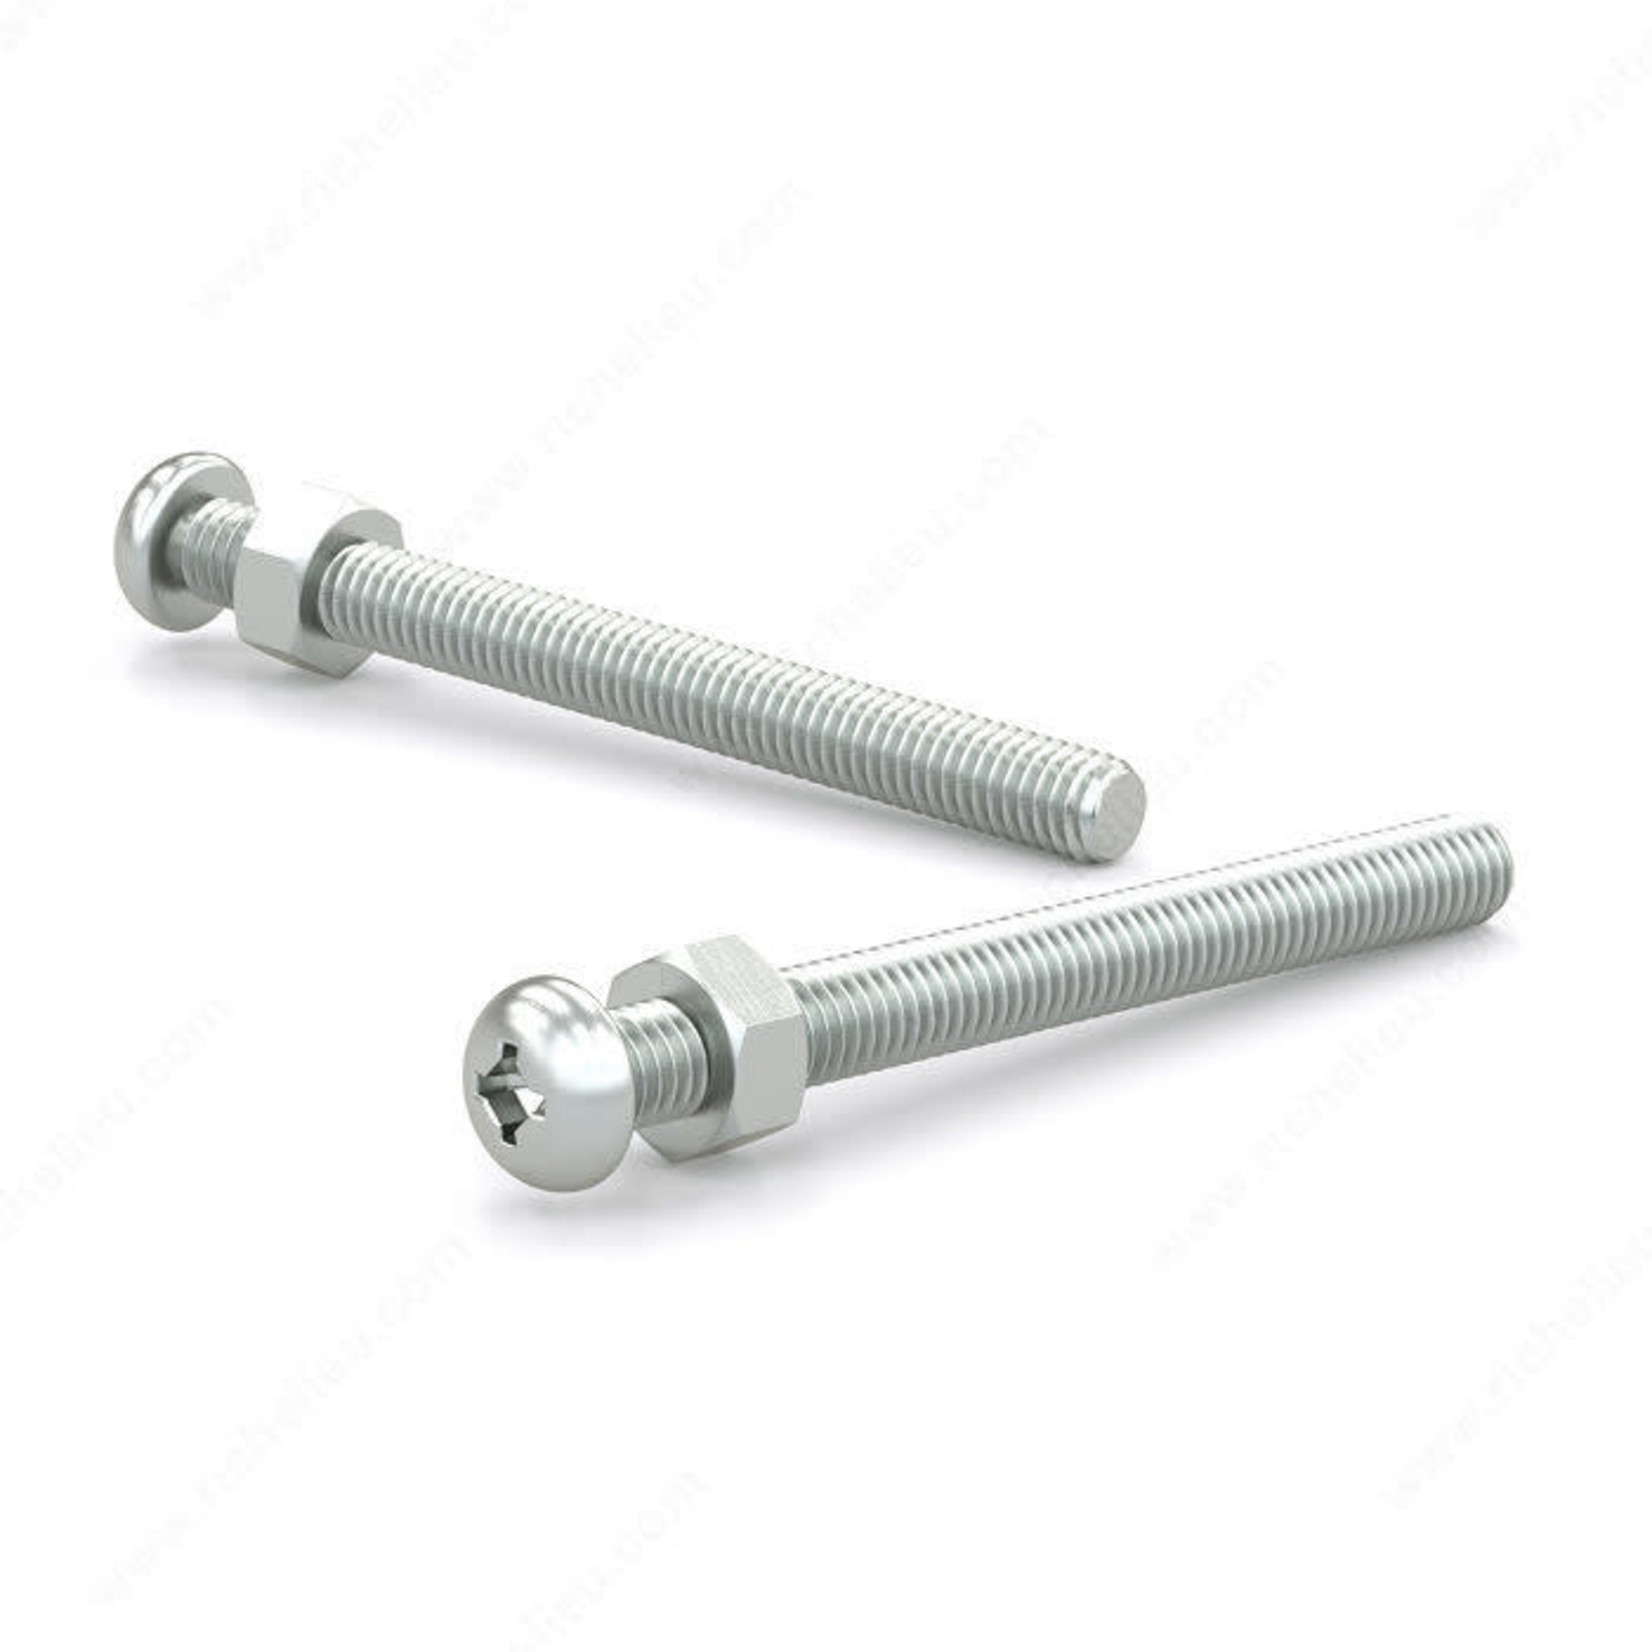 RELIABLE MACHINE SCREW WITH NUT, PAN HEAD, 10-32 1IN, 10PK BLISTER